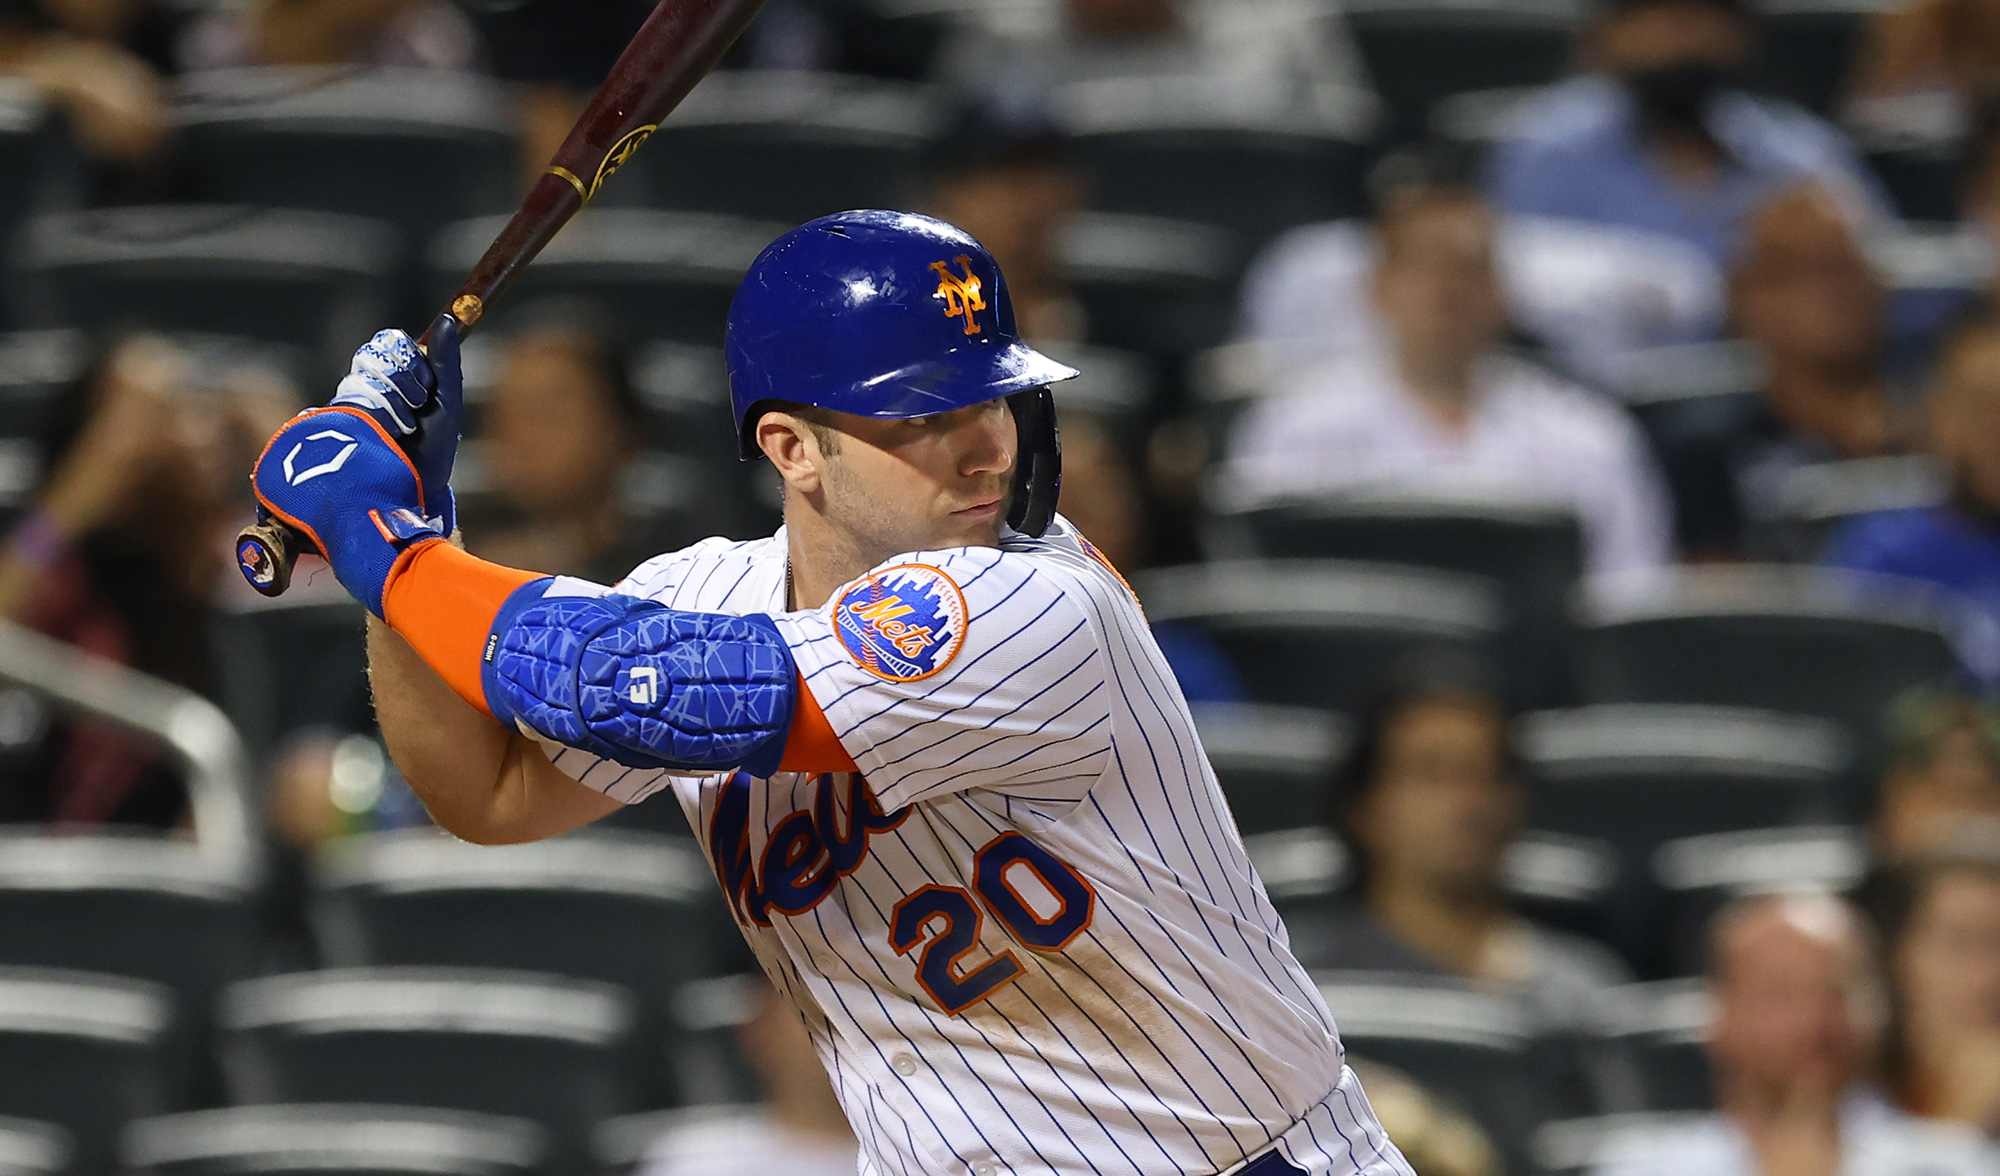 Mets Player Pete Alonso Says He's Fine After Car Accident in Florida -  Bloomberg